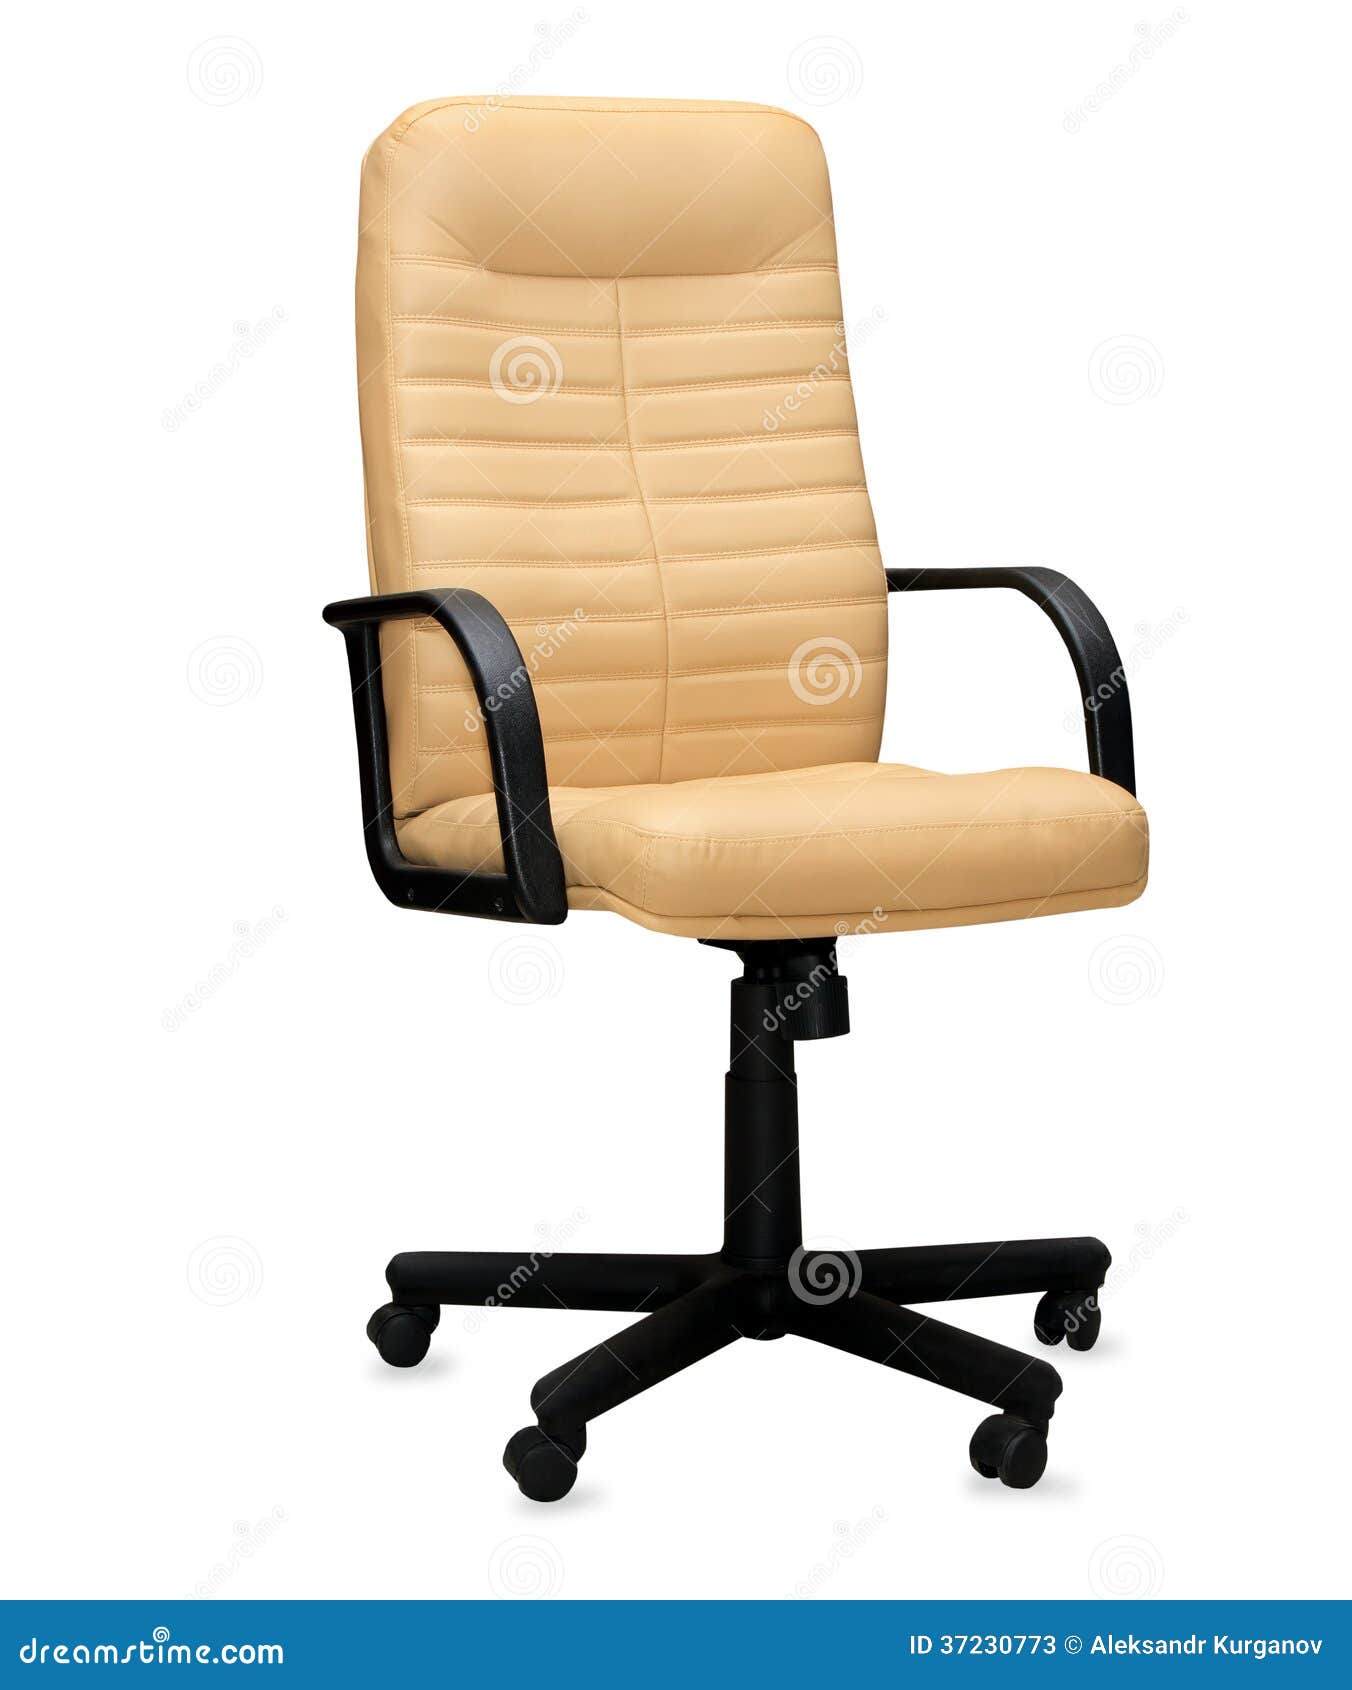 The Office Chair from Beige Leather. Stock Image - Image of chair ...